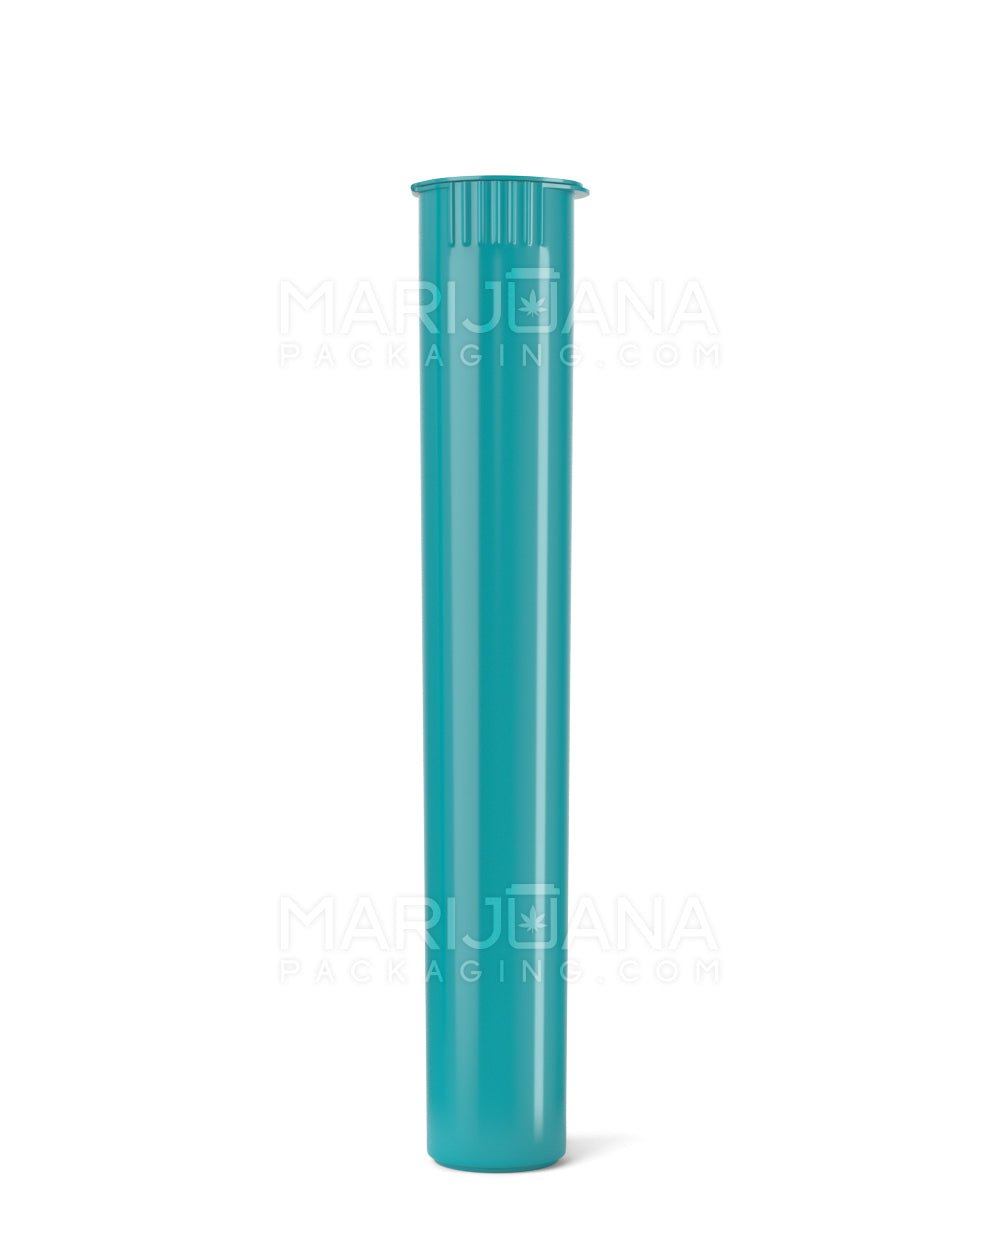 Child Resistant | King Size Pop Top Opaque Plastic Pre-Roll Tubes | 116mm - Teal - 1000 Count - 2